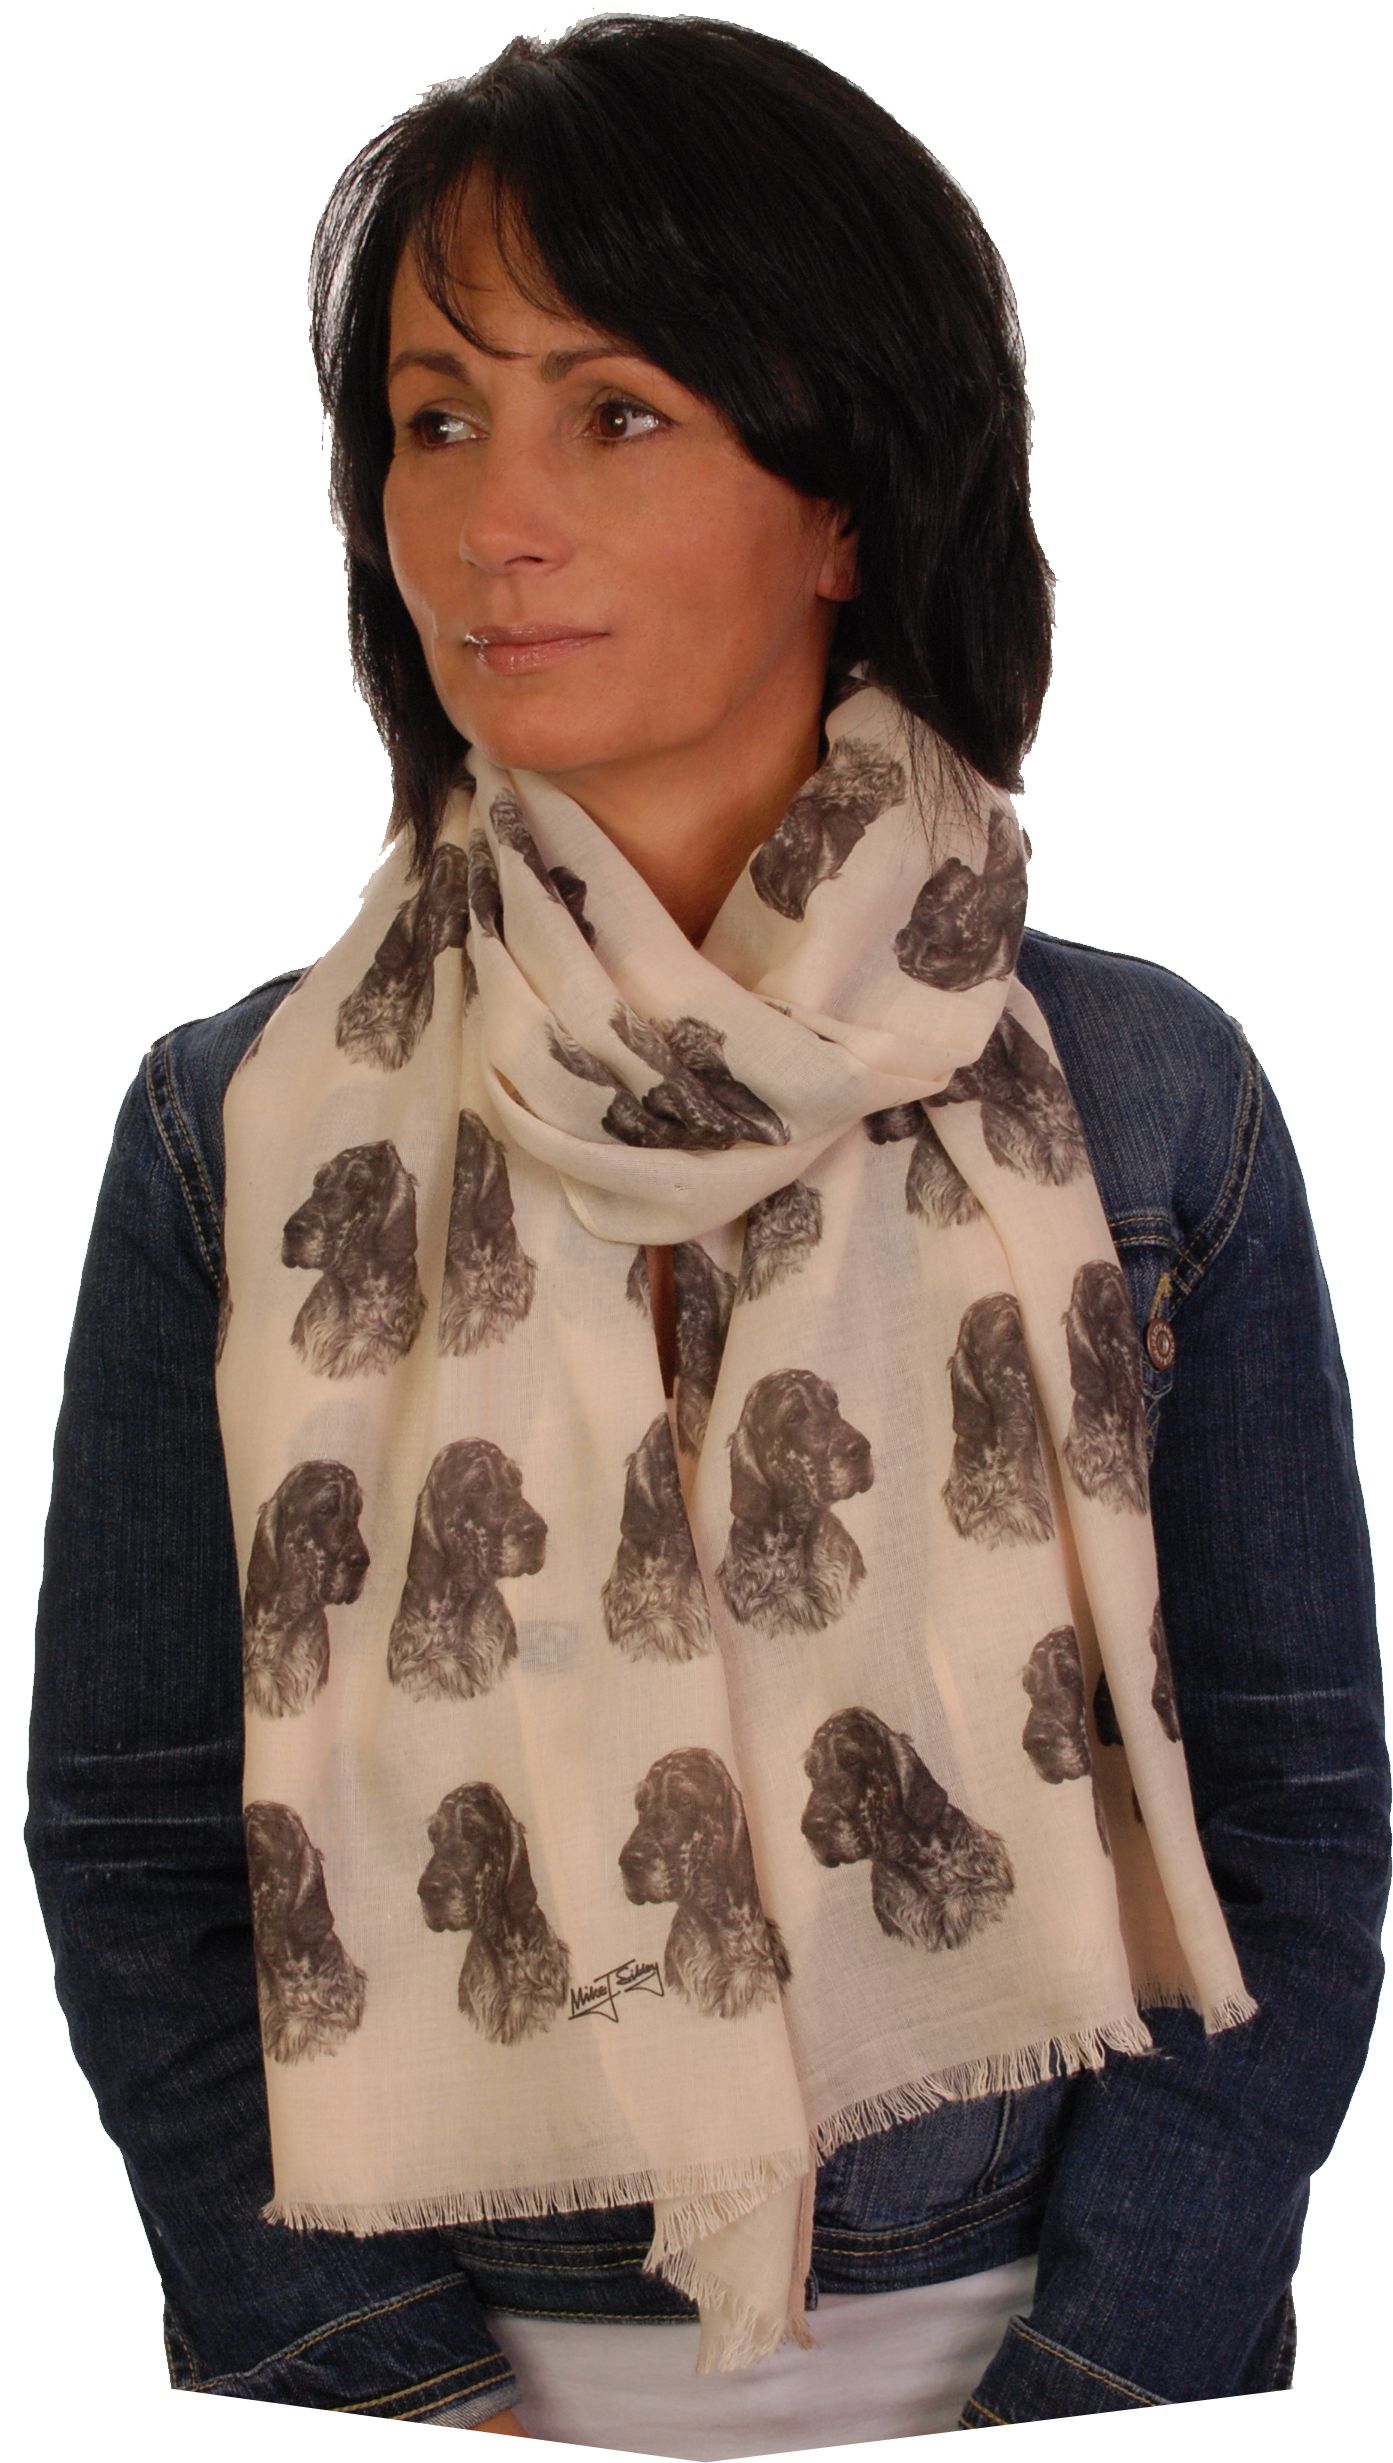 scarf with Whippets on dog breed design on womens fashion shawl wrap mike sibley 